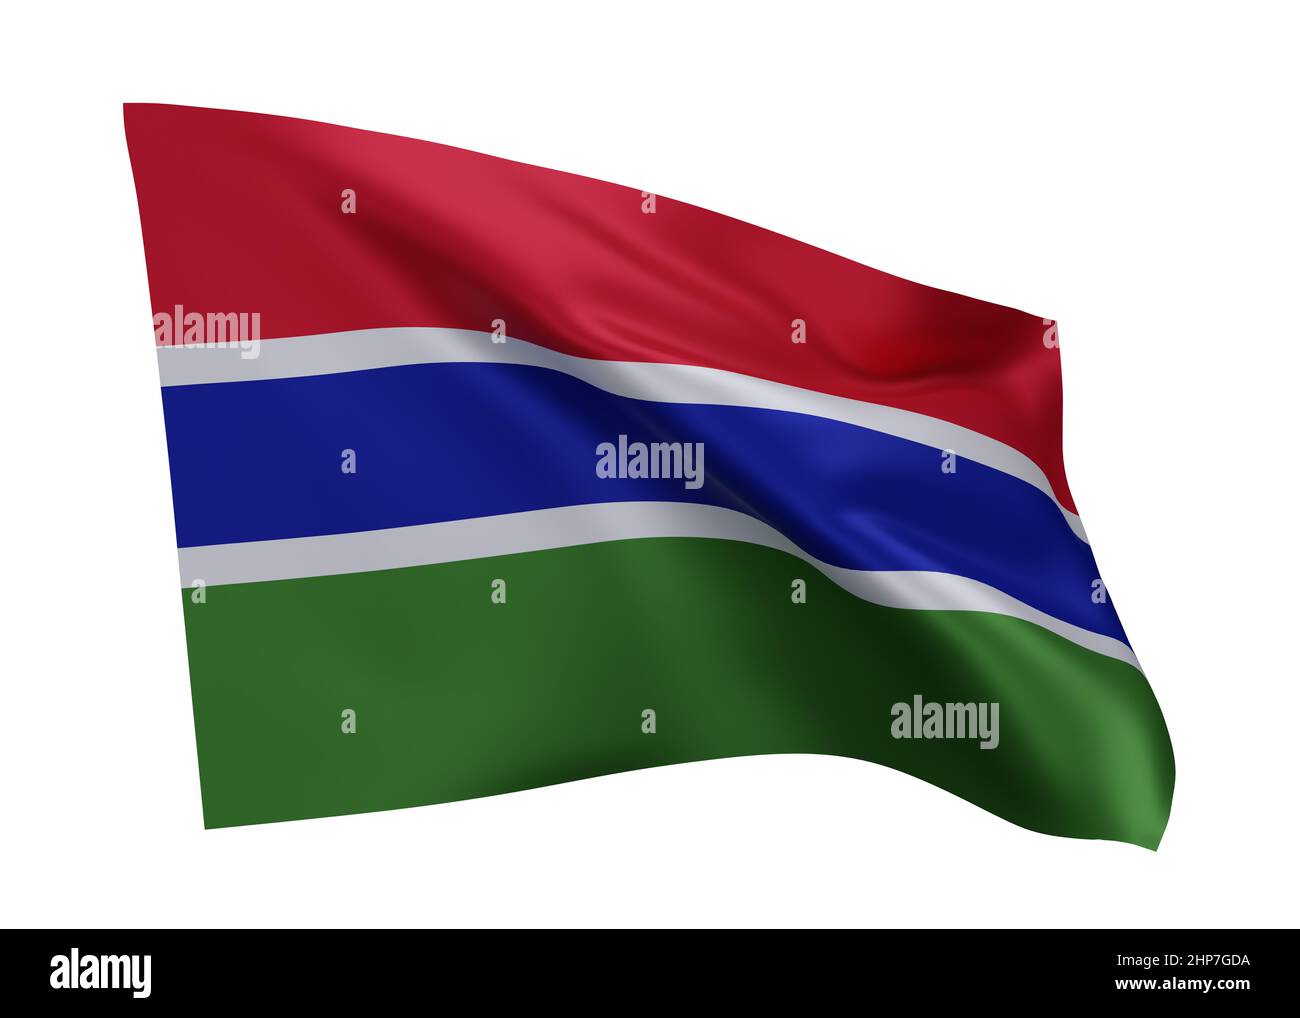 3d illustration flag of Gambia. Gambian high resolution flag isolated against white background. 3d rendering Stock Photo